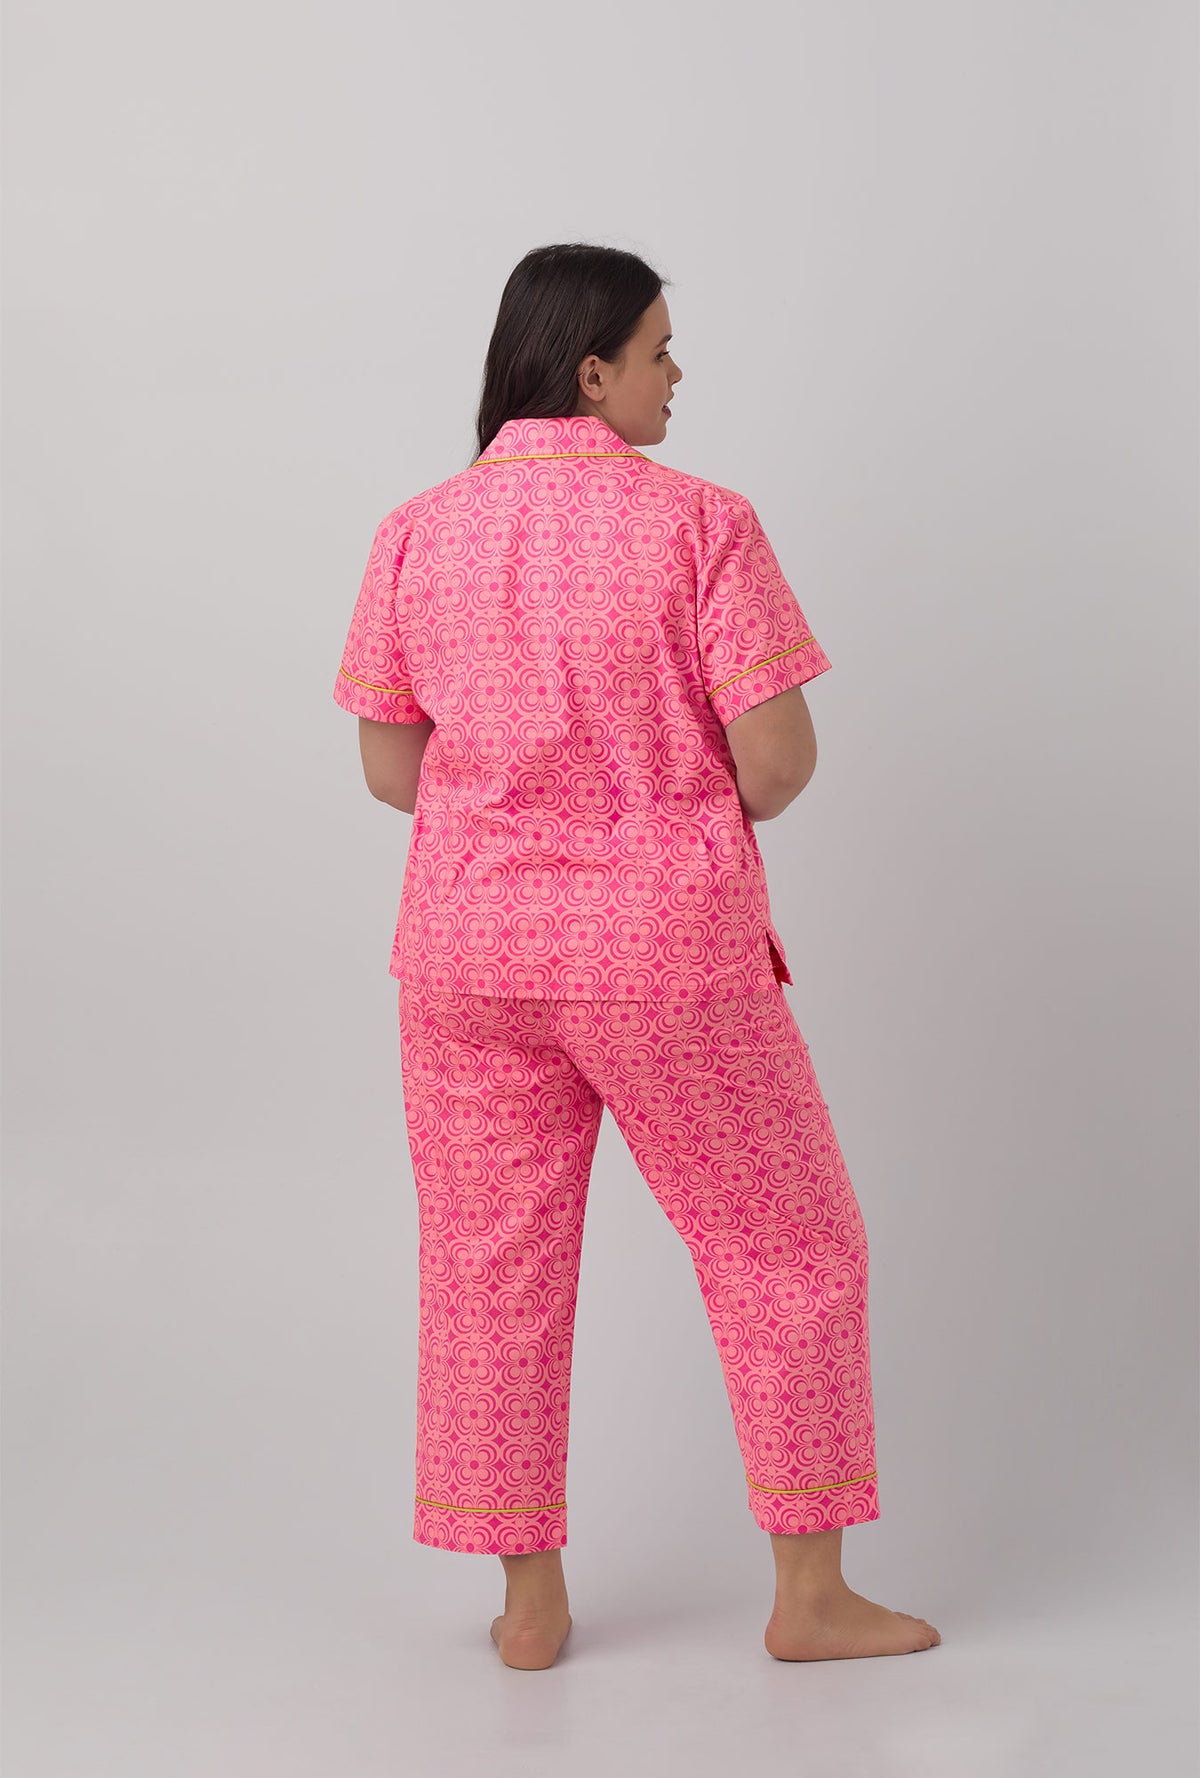 A lady wearing pink short sleeve cropped plus size pj set with summer geo print.